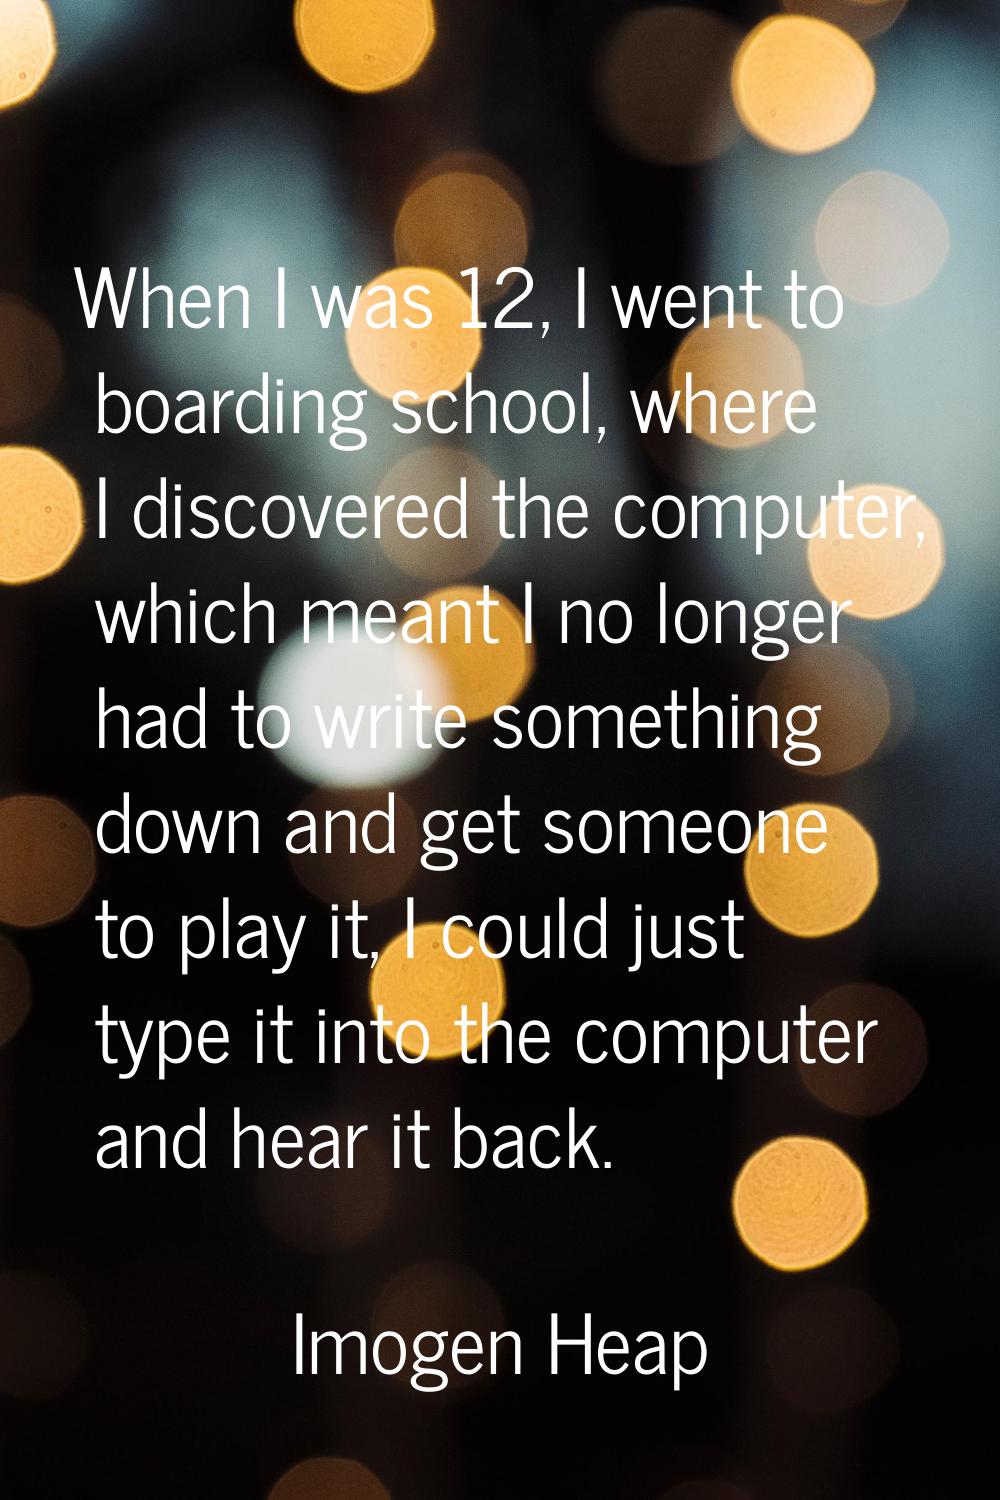 When I was 12, I went to boarding school, where I discovered the computer, which meant I no longer 